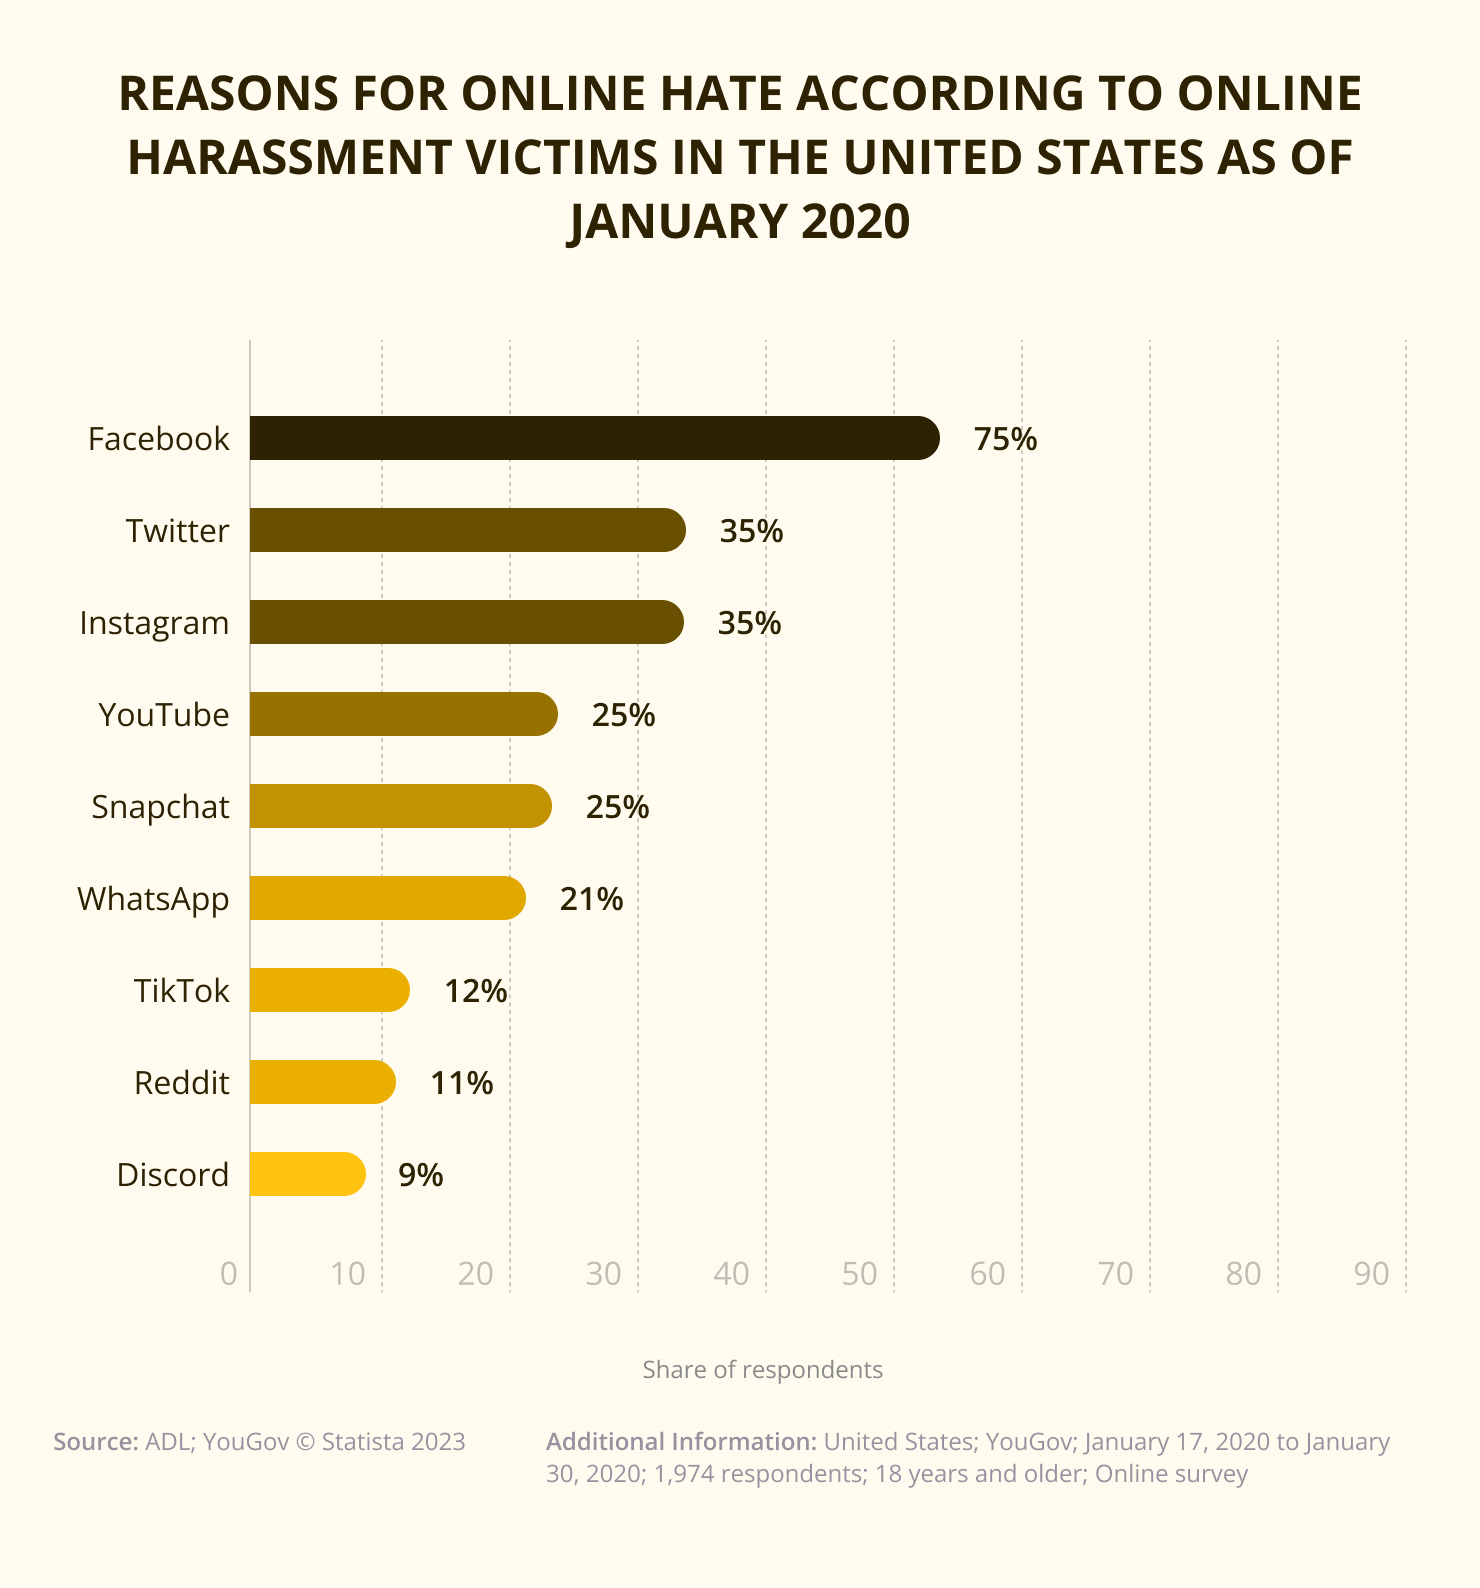 Reasons For Online Hate In U.S.